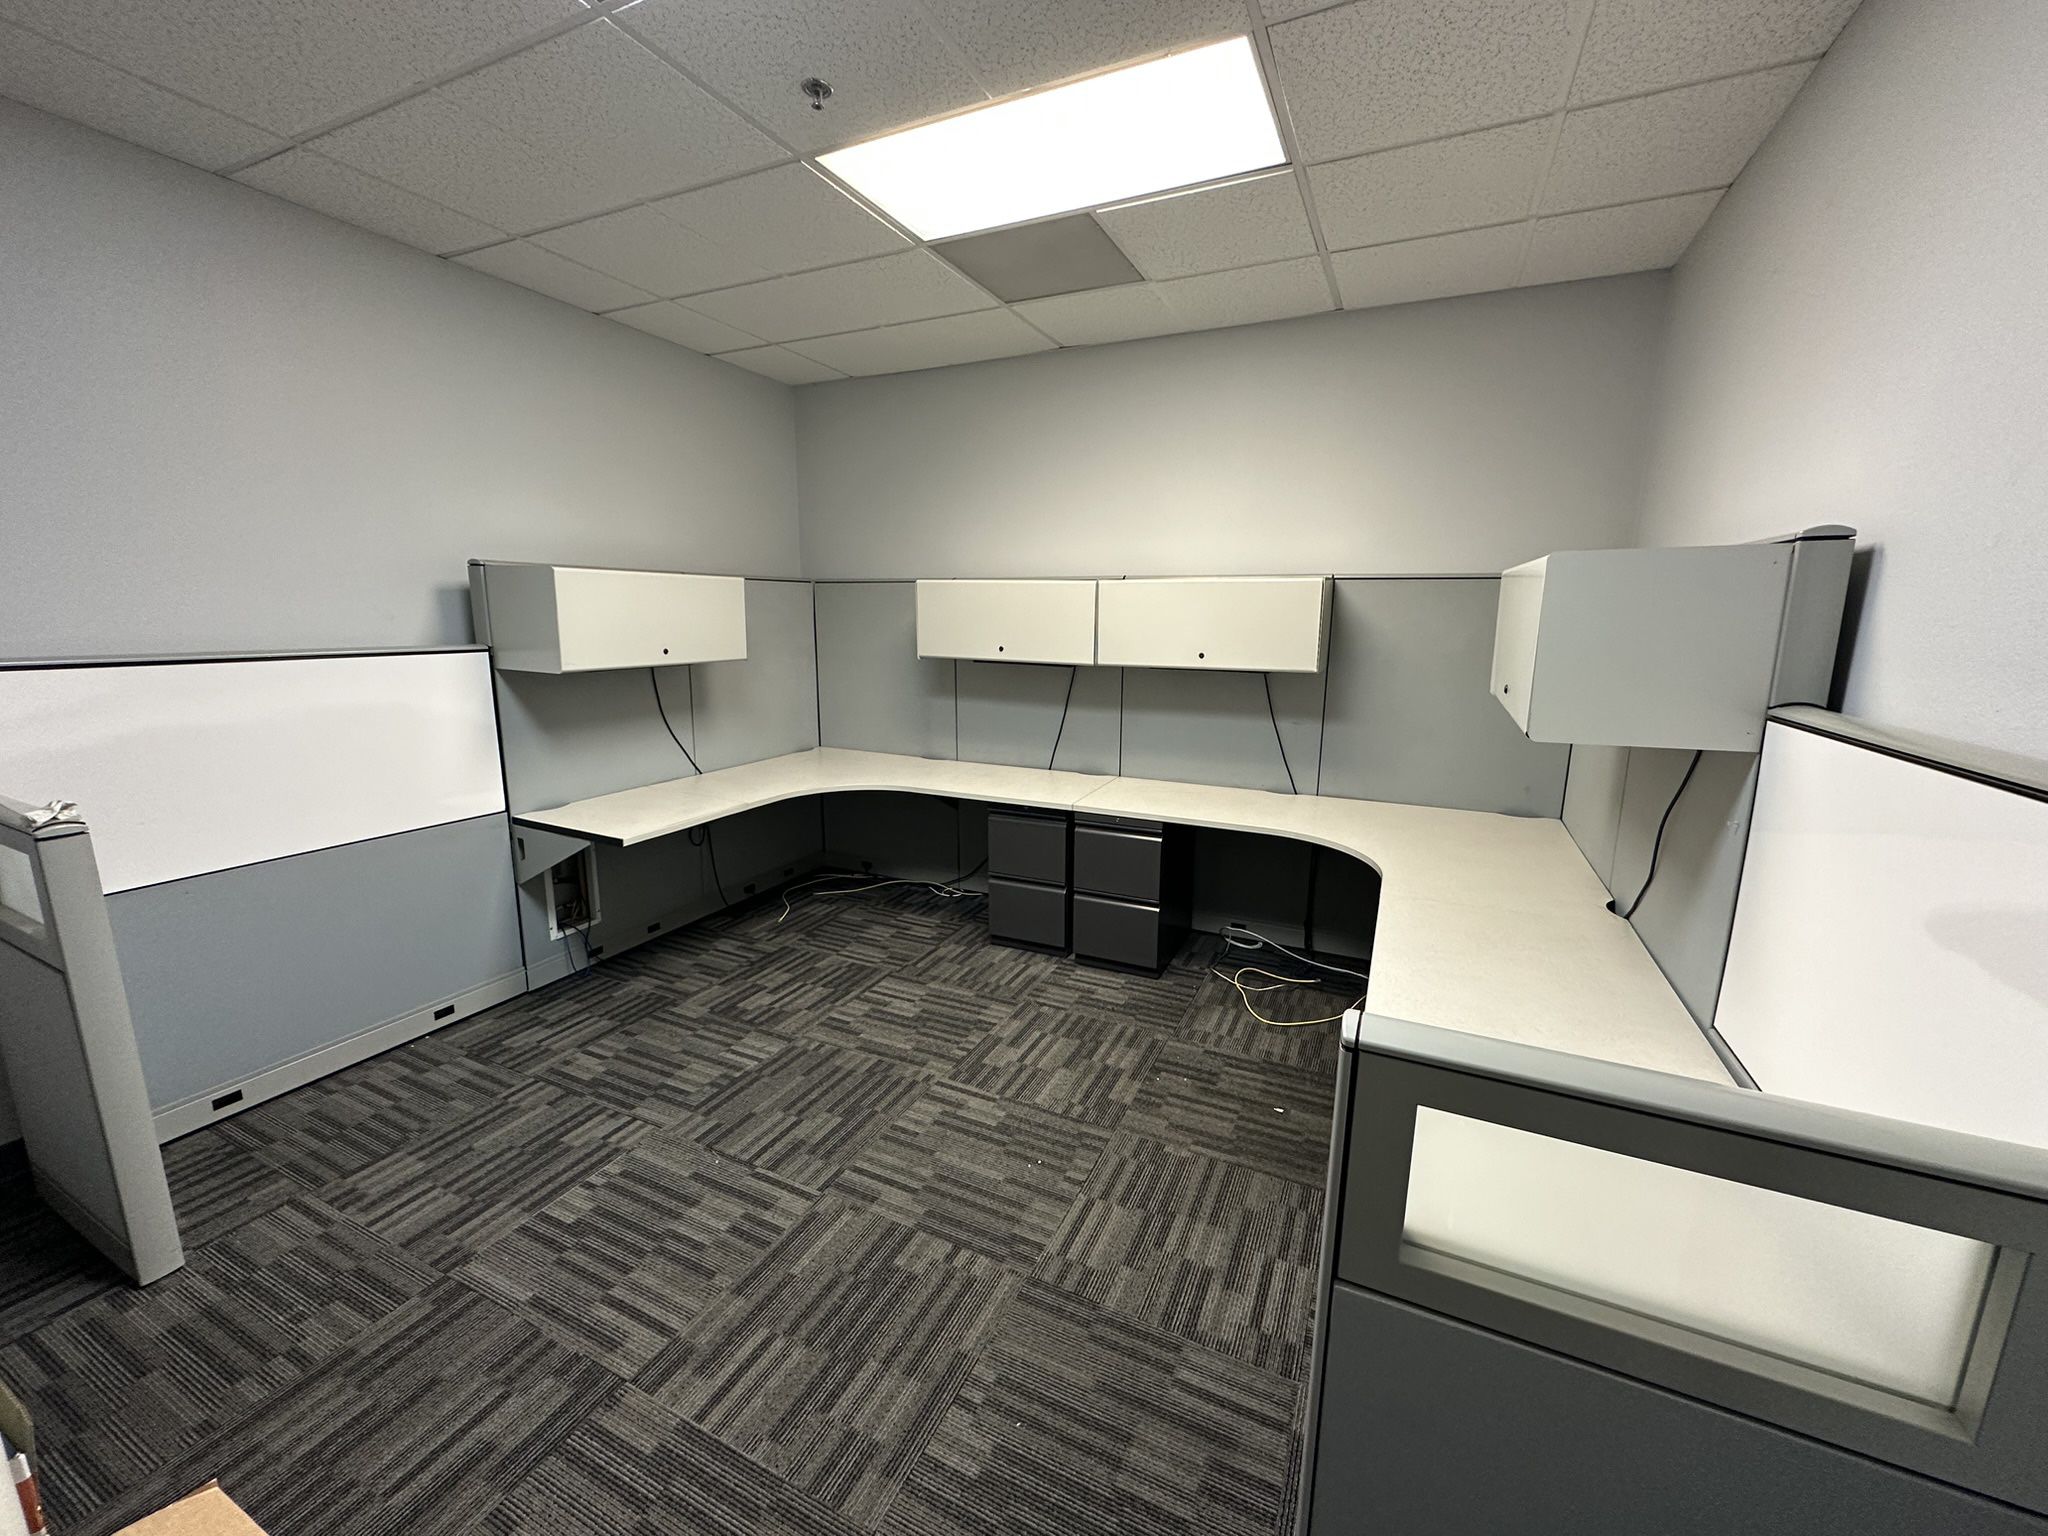 Used 2-cubicle Office Furniture